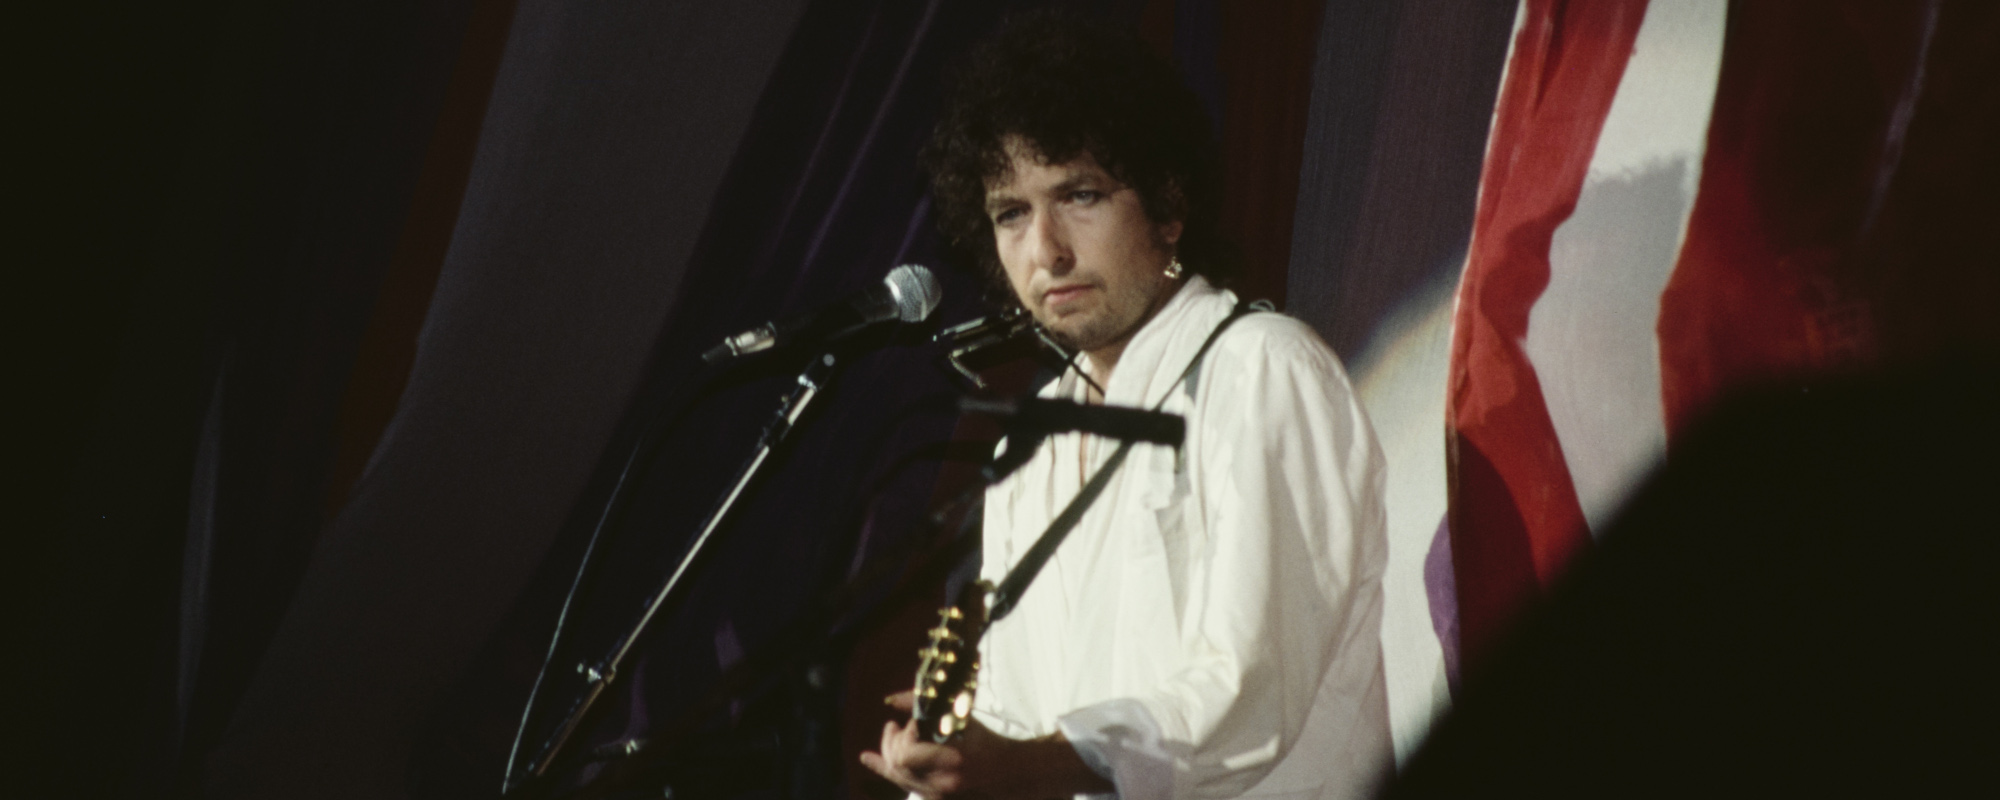 Ranking the 5 Best Songs on Bob Dylan’s Comeback Masterpiece ‘Time Out of Mind’